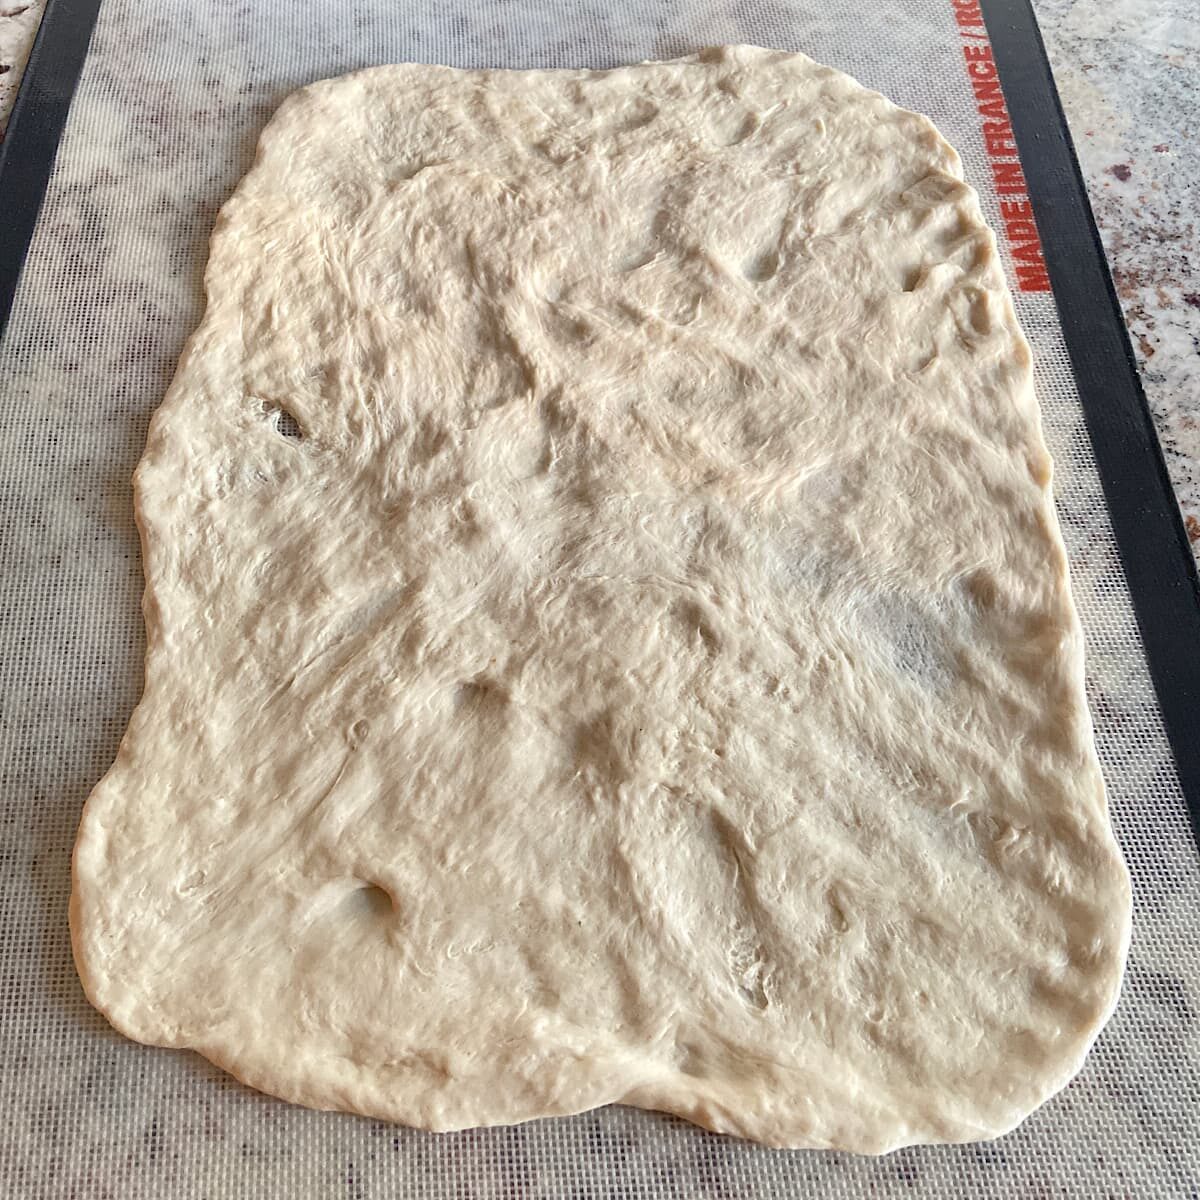 Thin Crust Pizza Dough rolled out on a silicon mat.